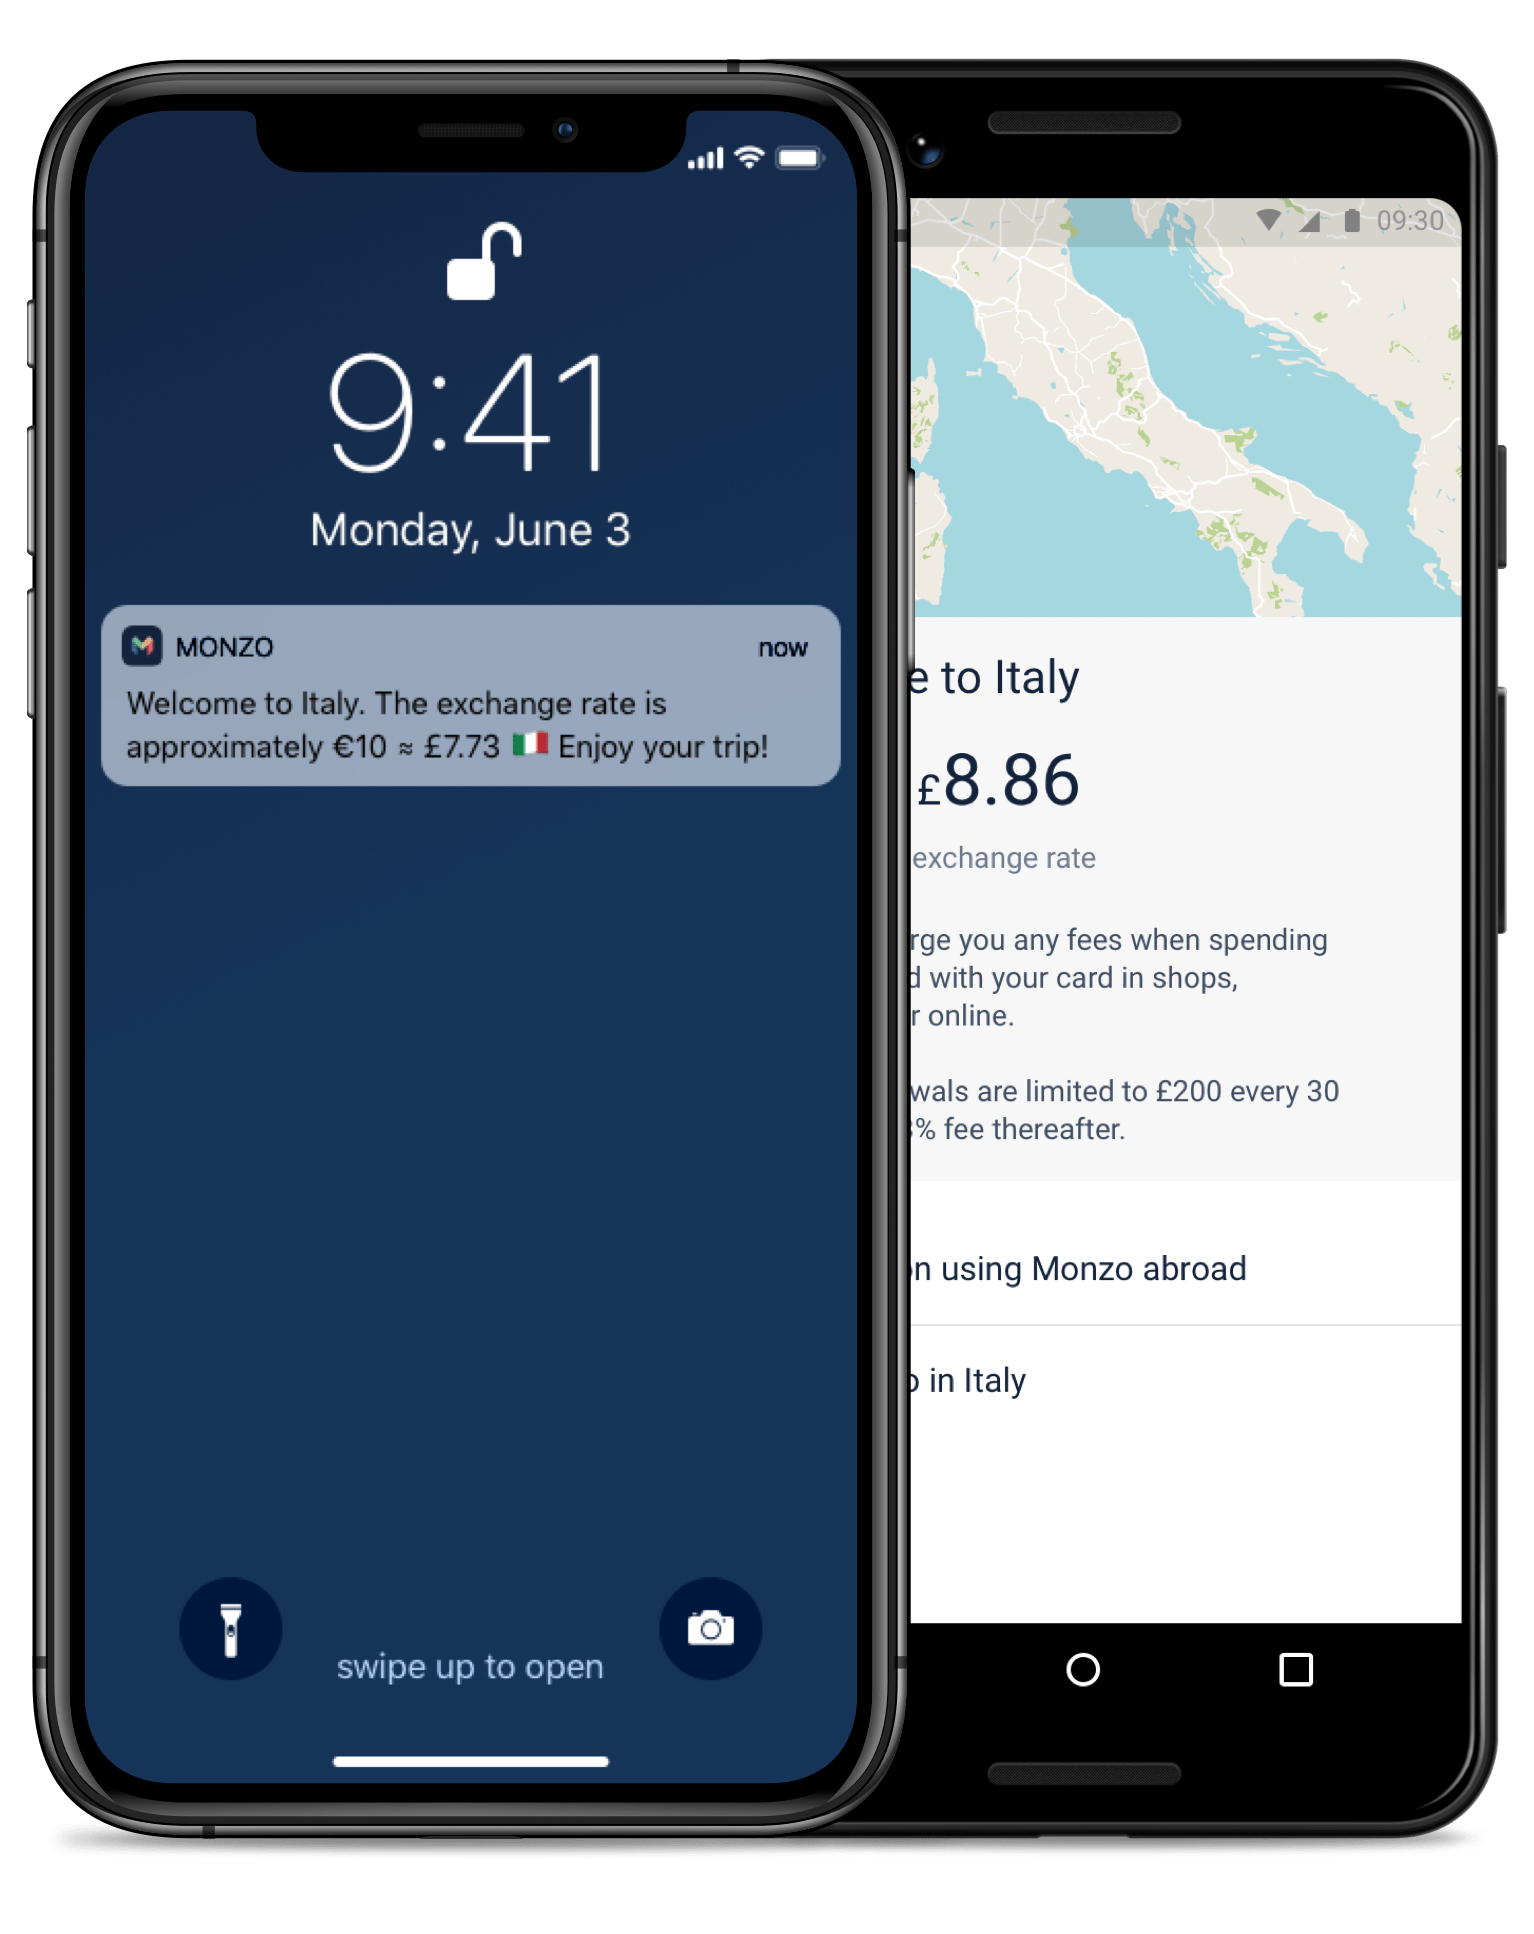 Monzo app showing the exchange rate